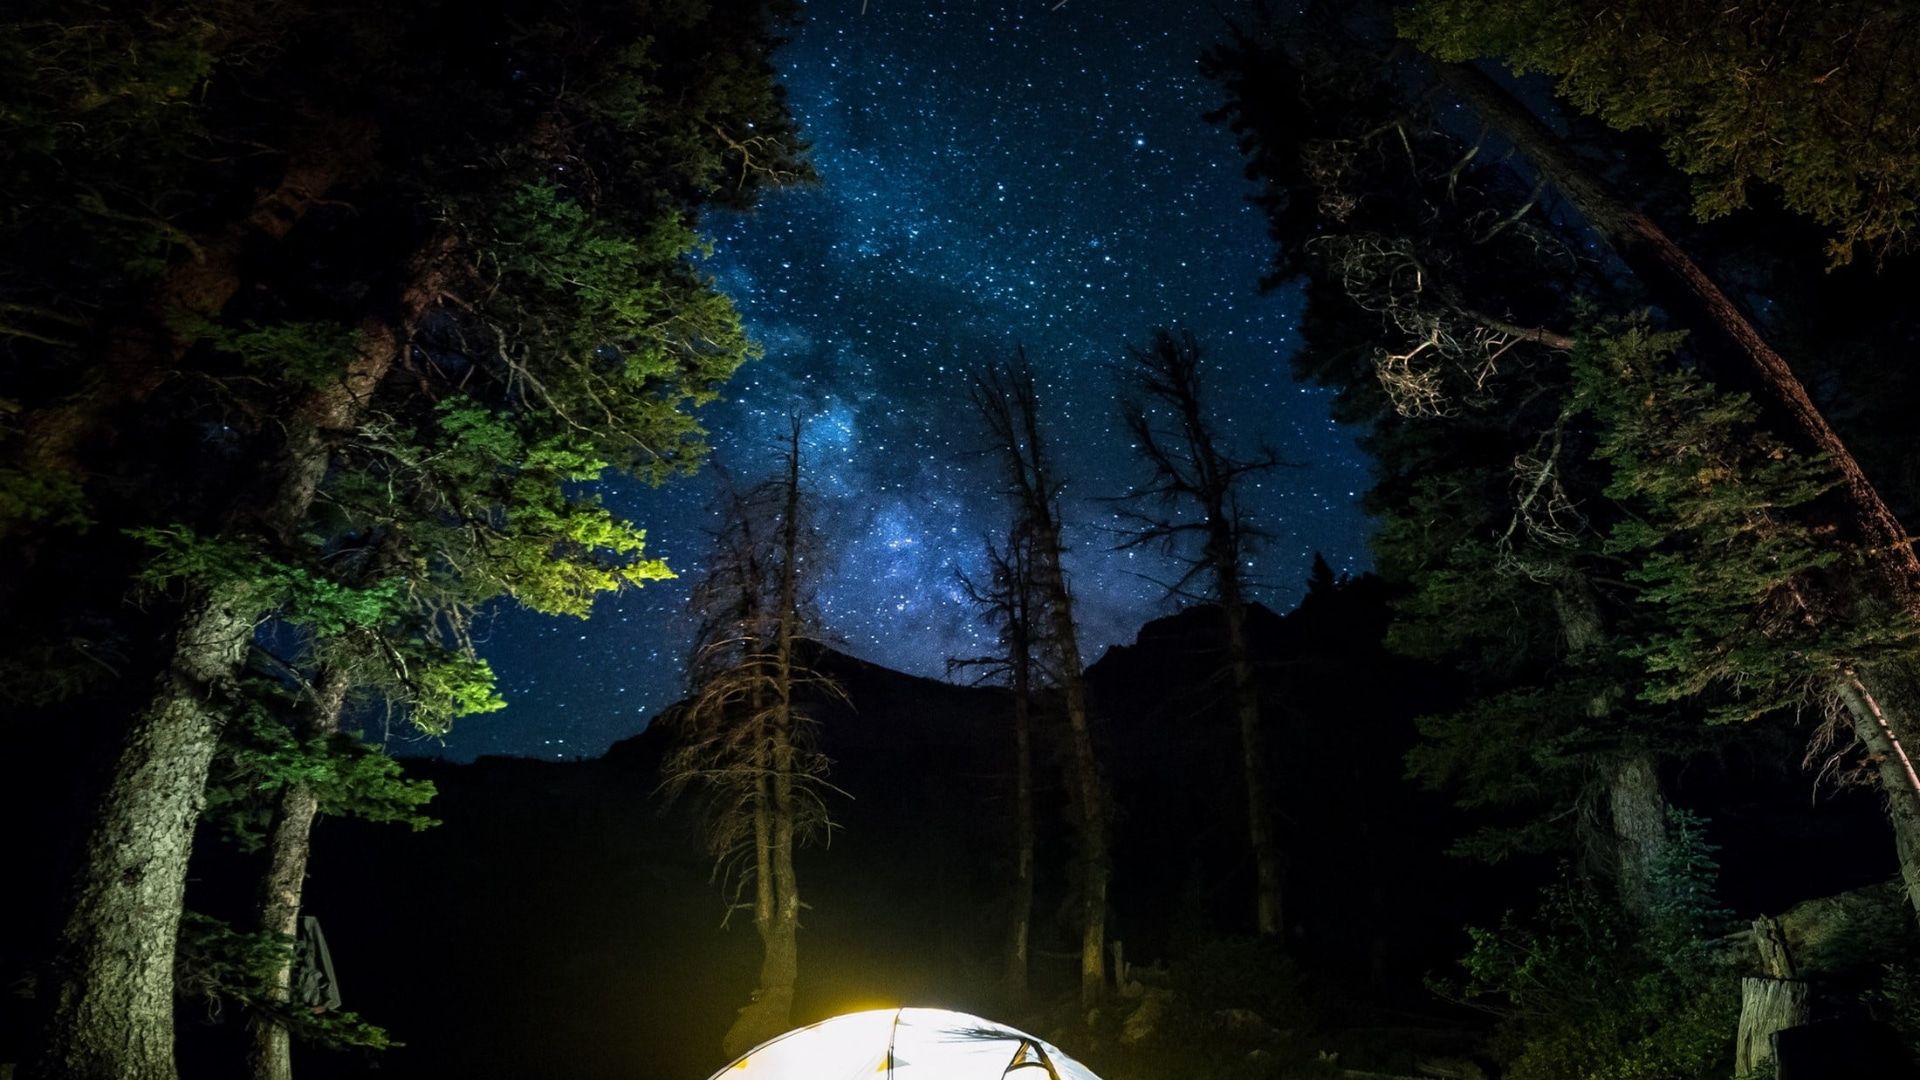 A person standing under a tent at night looking up at the stars - Camping